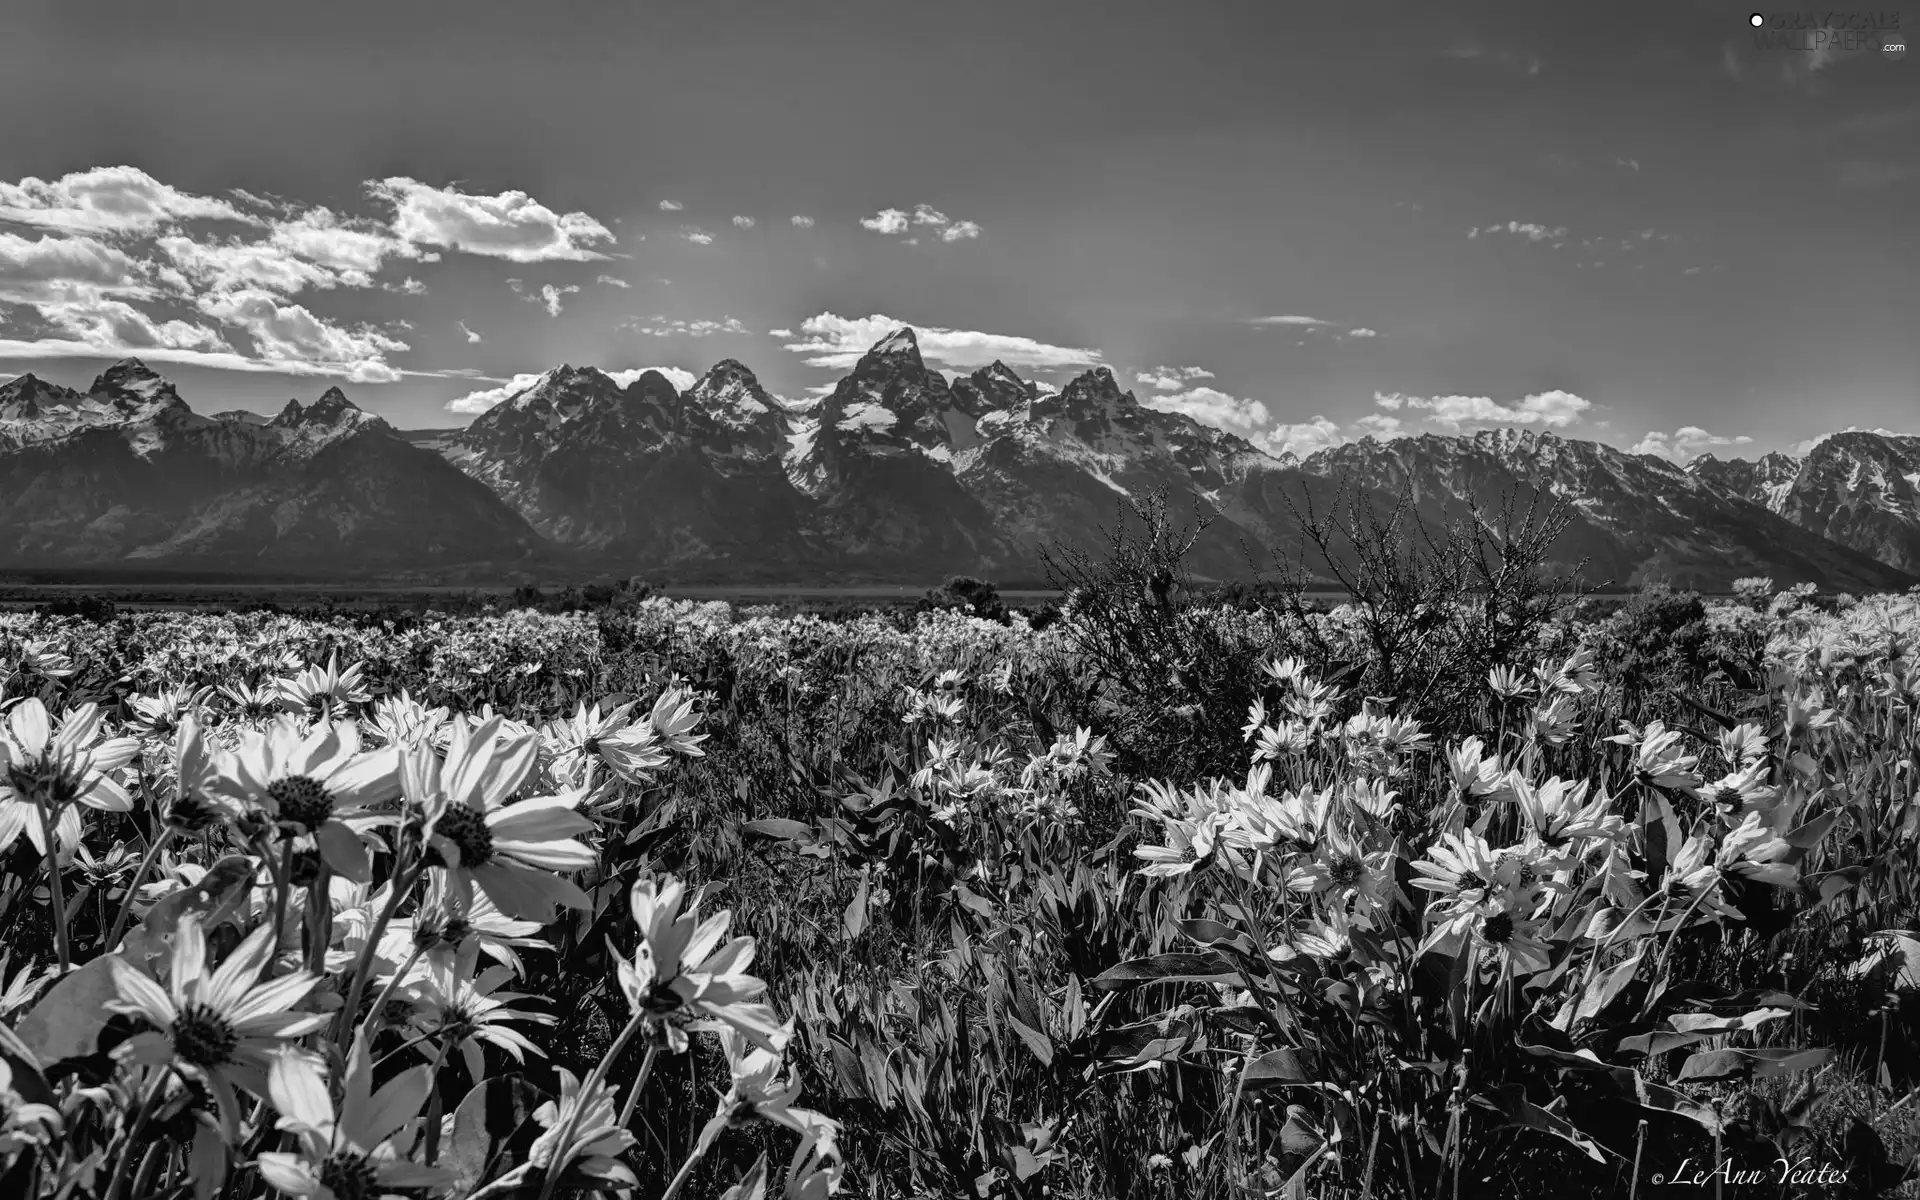 Grand Teton National Park, The United States, Flowers, Meadow, Mountains, State of Wyoming